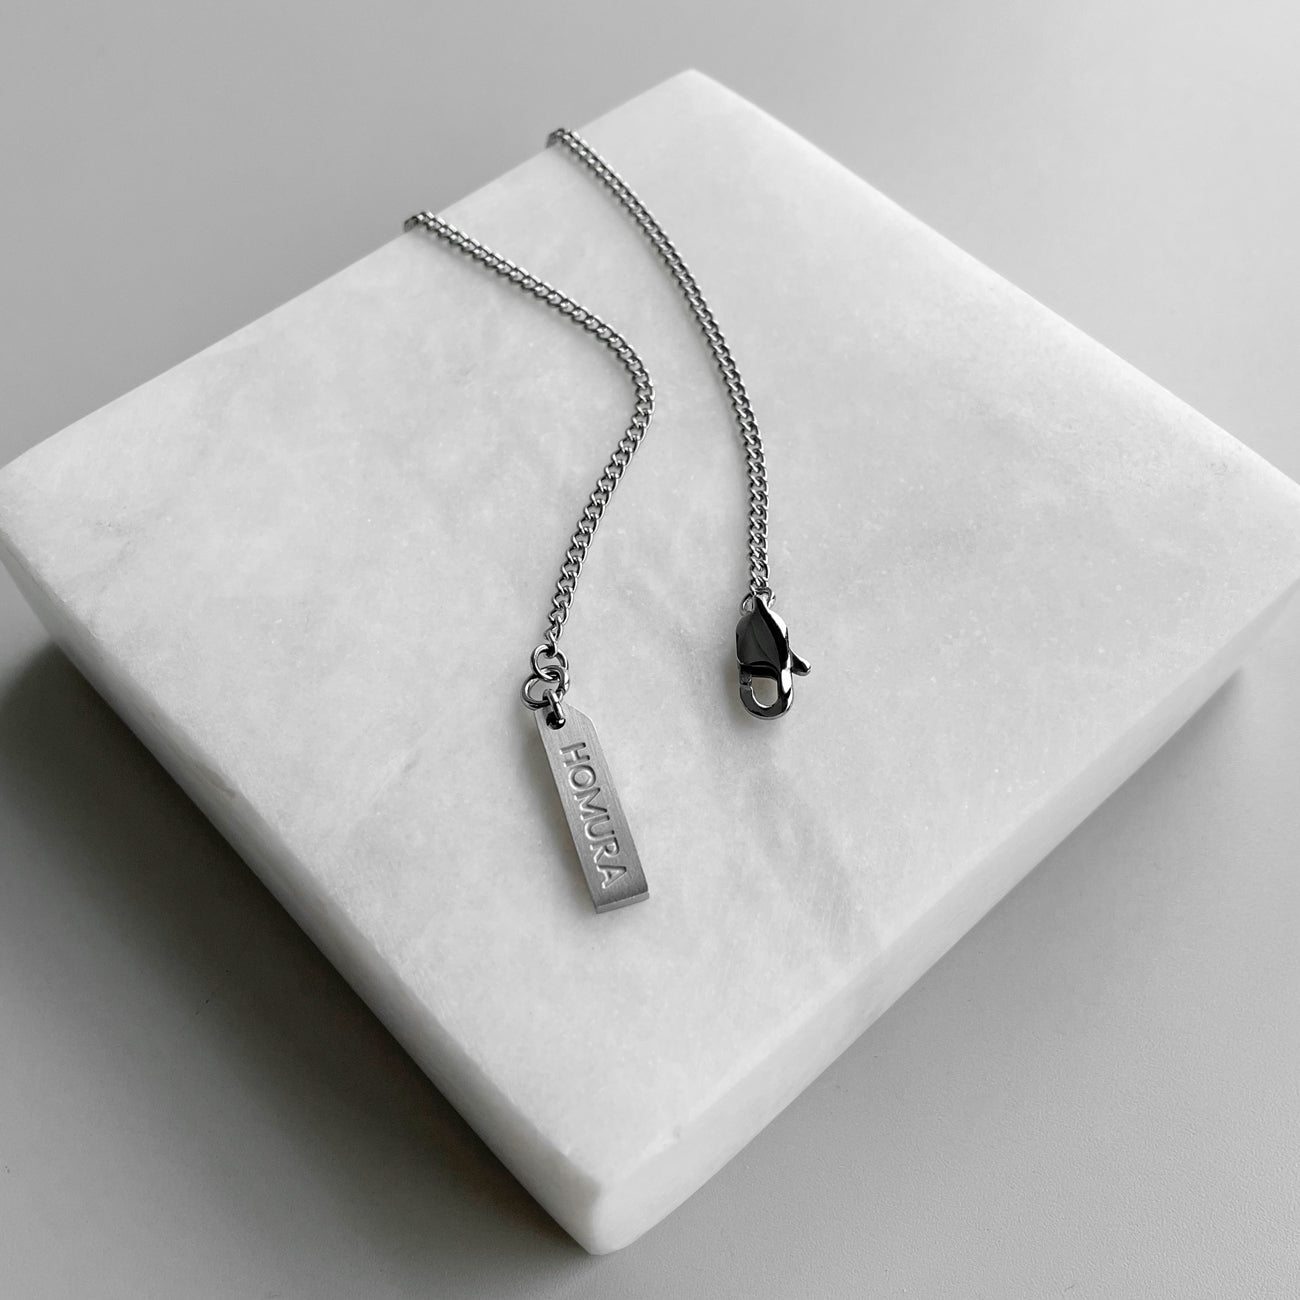 Sparrow® Feather Necklace